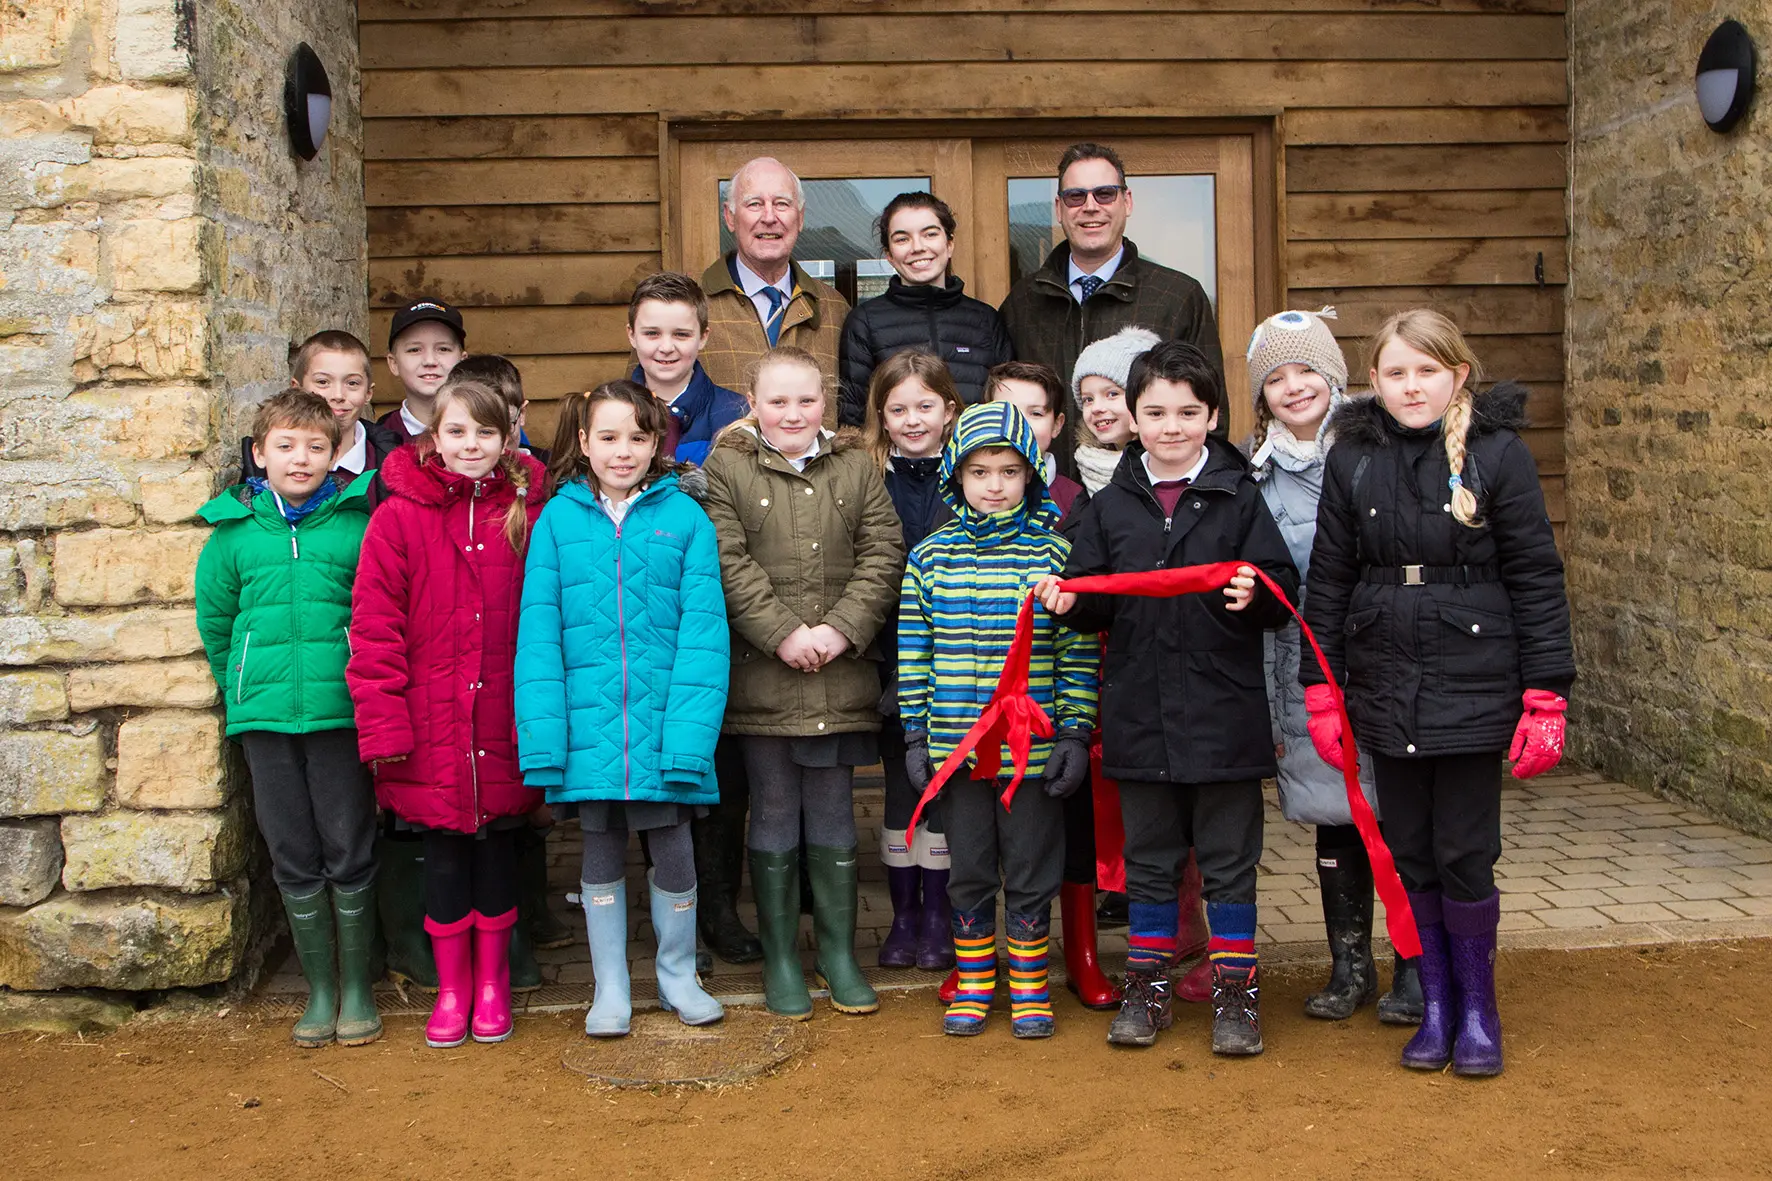 Norman Grundon, Chairman of Grundon Waste Management (back left) and Neil Grundon, Deputy Chairman (back right) celebrate the opening of the new education centre at Greystones Farm with children from Bourton-on-the-Water Primary School.